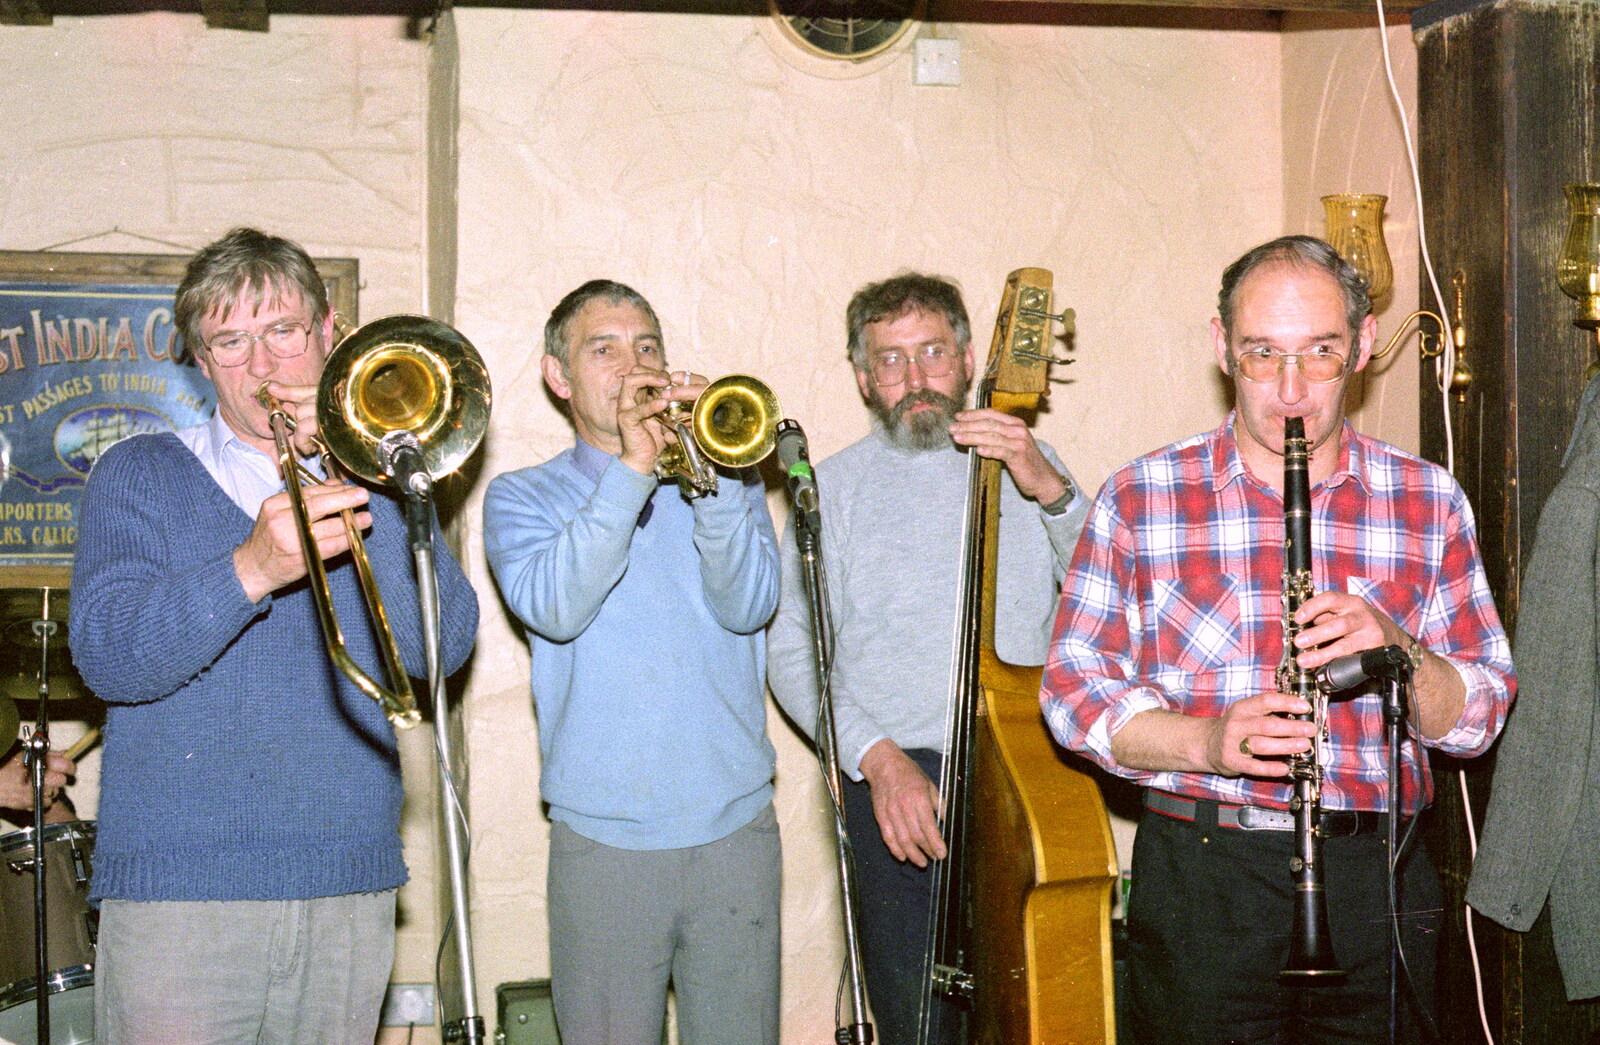 Trad jazz in the Wine Lodge from Uni: Night and Day on the Barbican, Plymouth, Devon - 1st May 1986